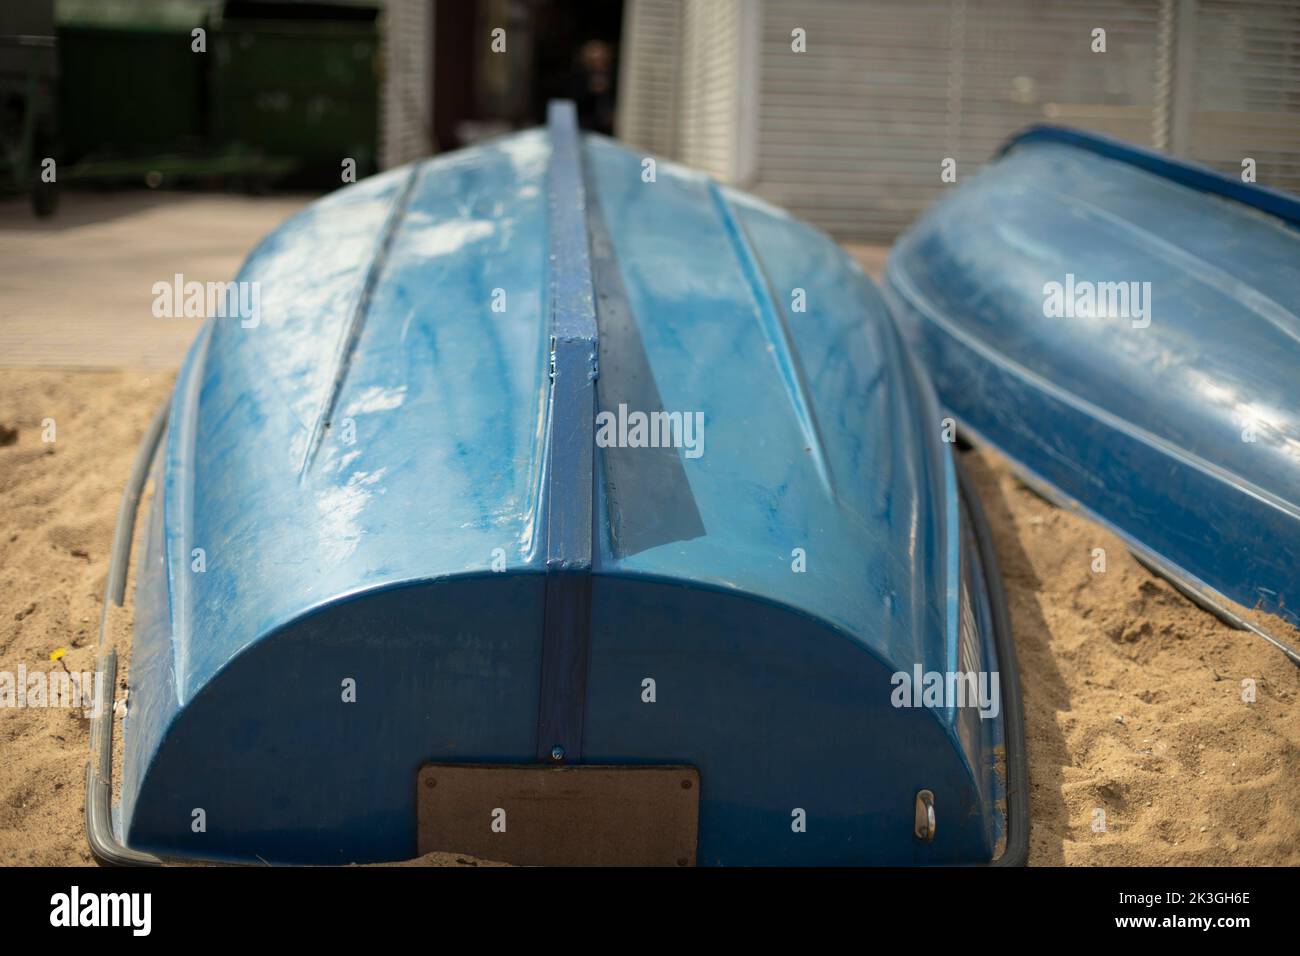 Blue boats on sand. Boat station. Boats dry up on shore. Stock Photo